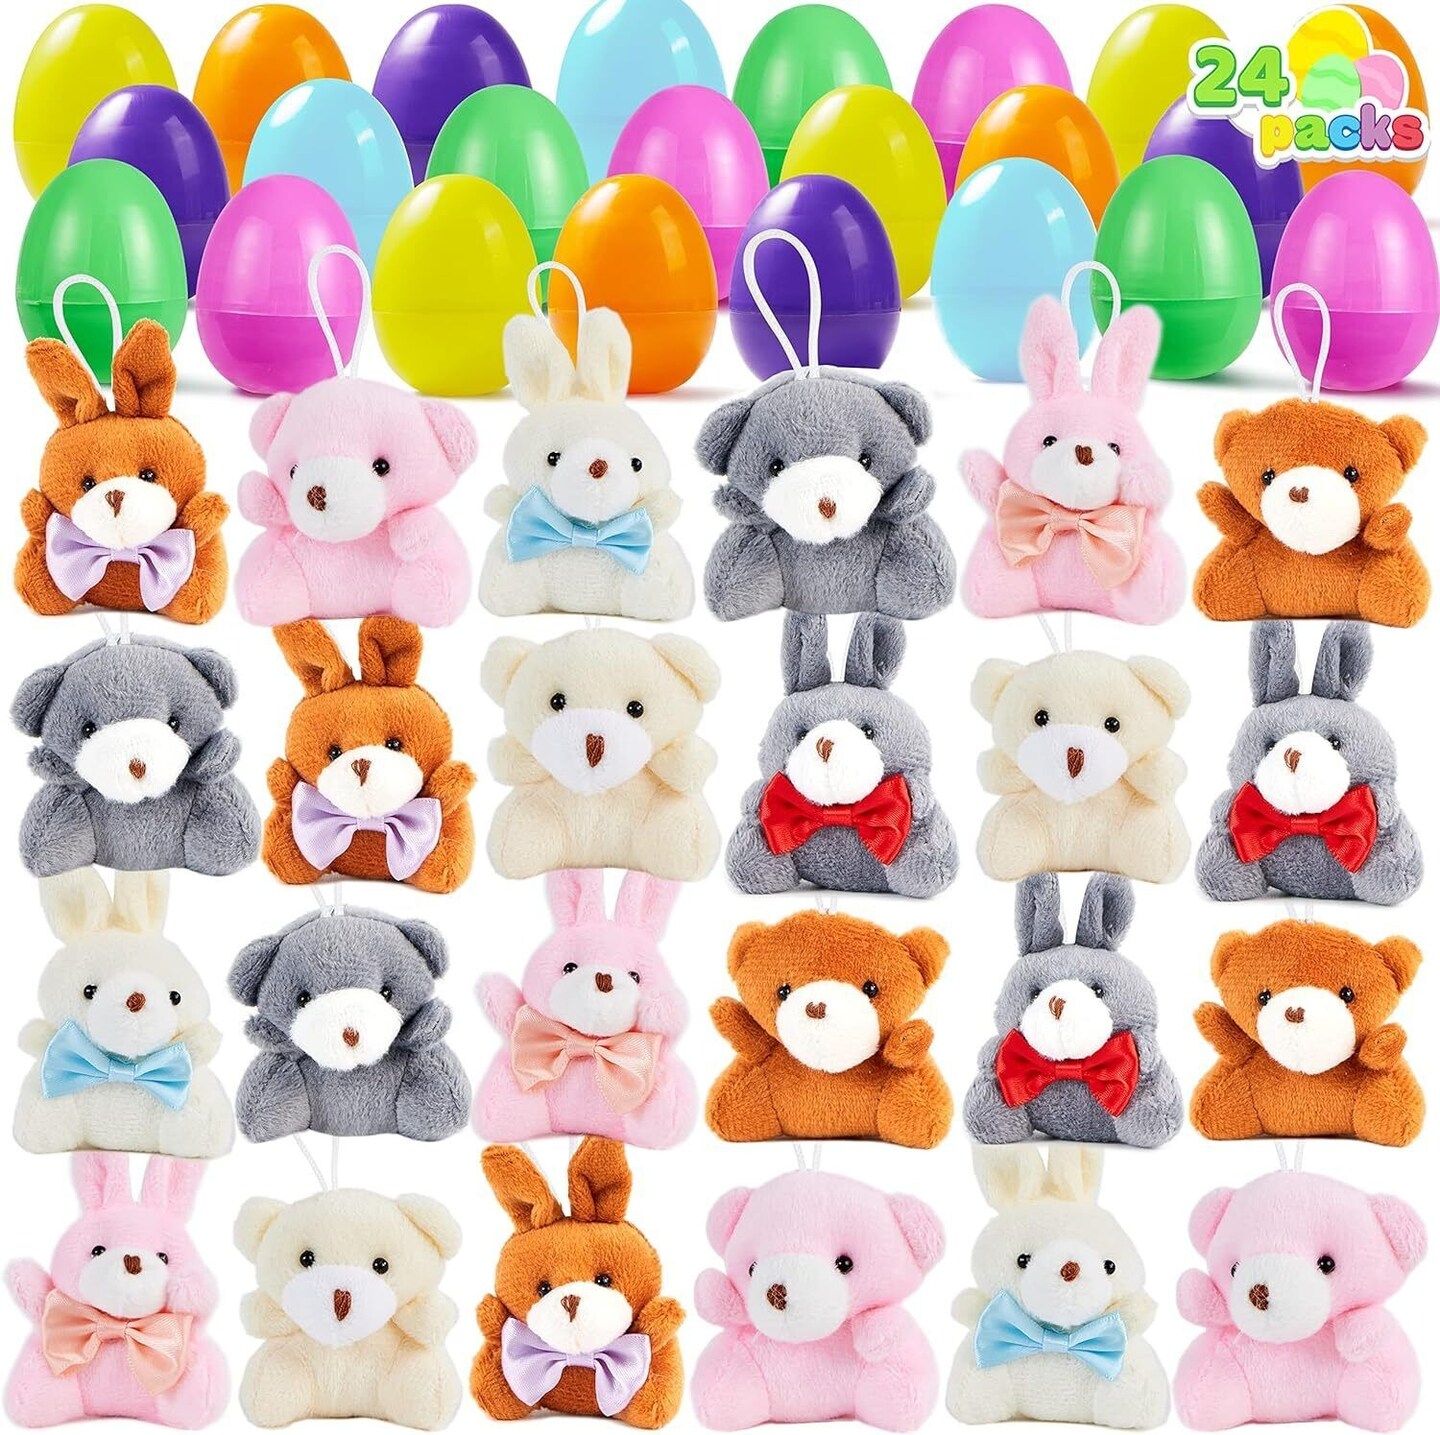 24 Pcs Pre-Filled Easter Egg with Plush Bunnies and Bears Plush Animal Keychain